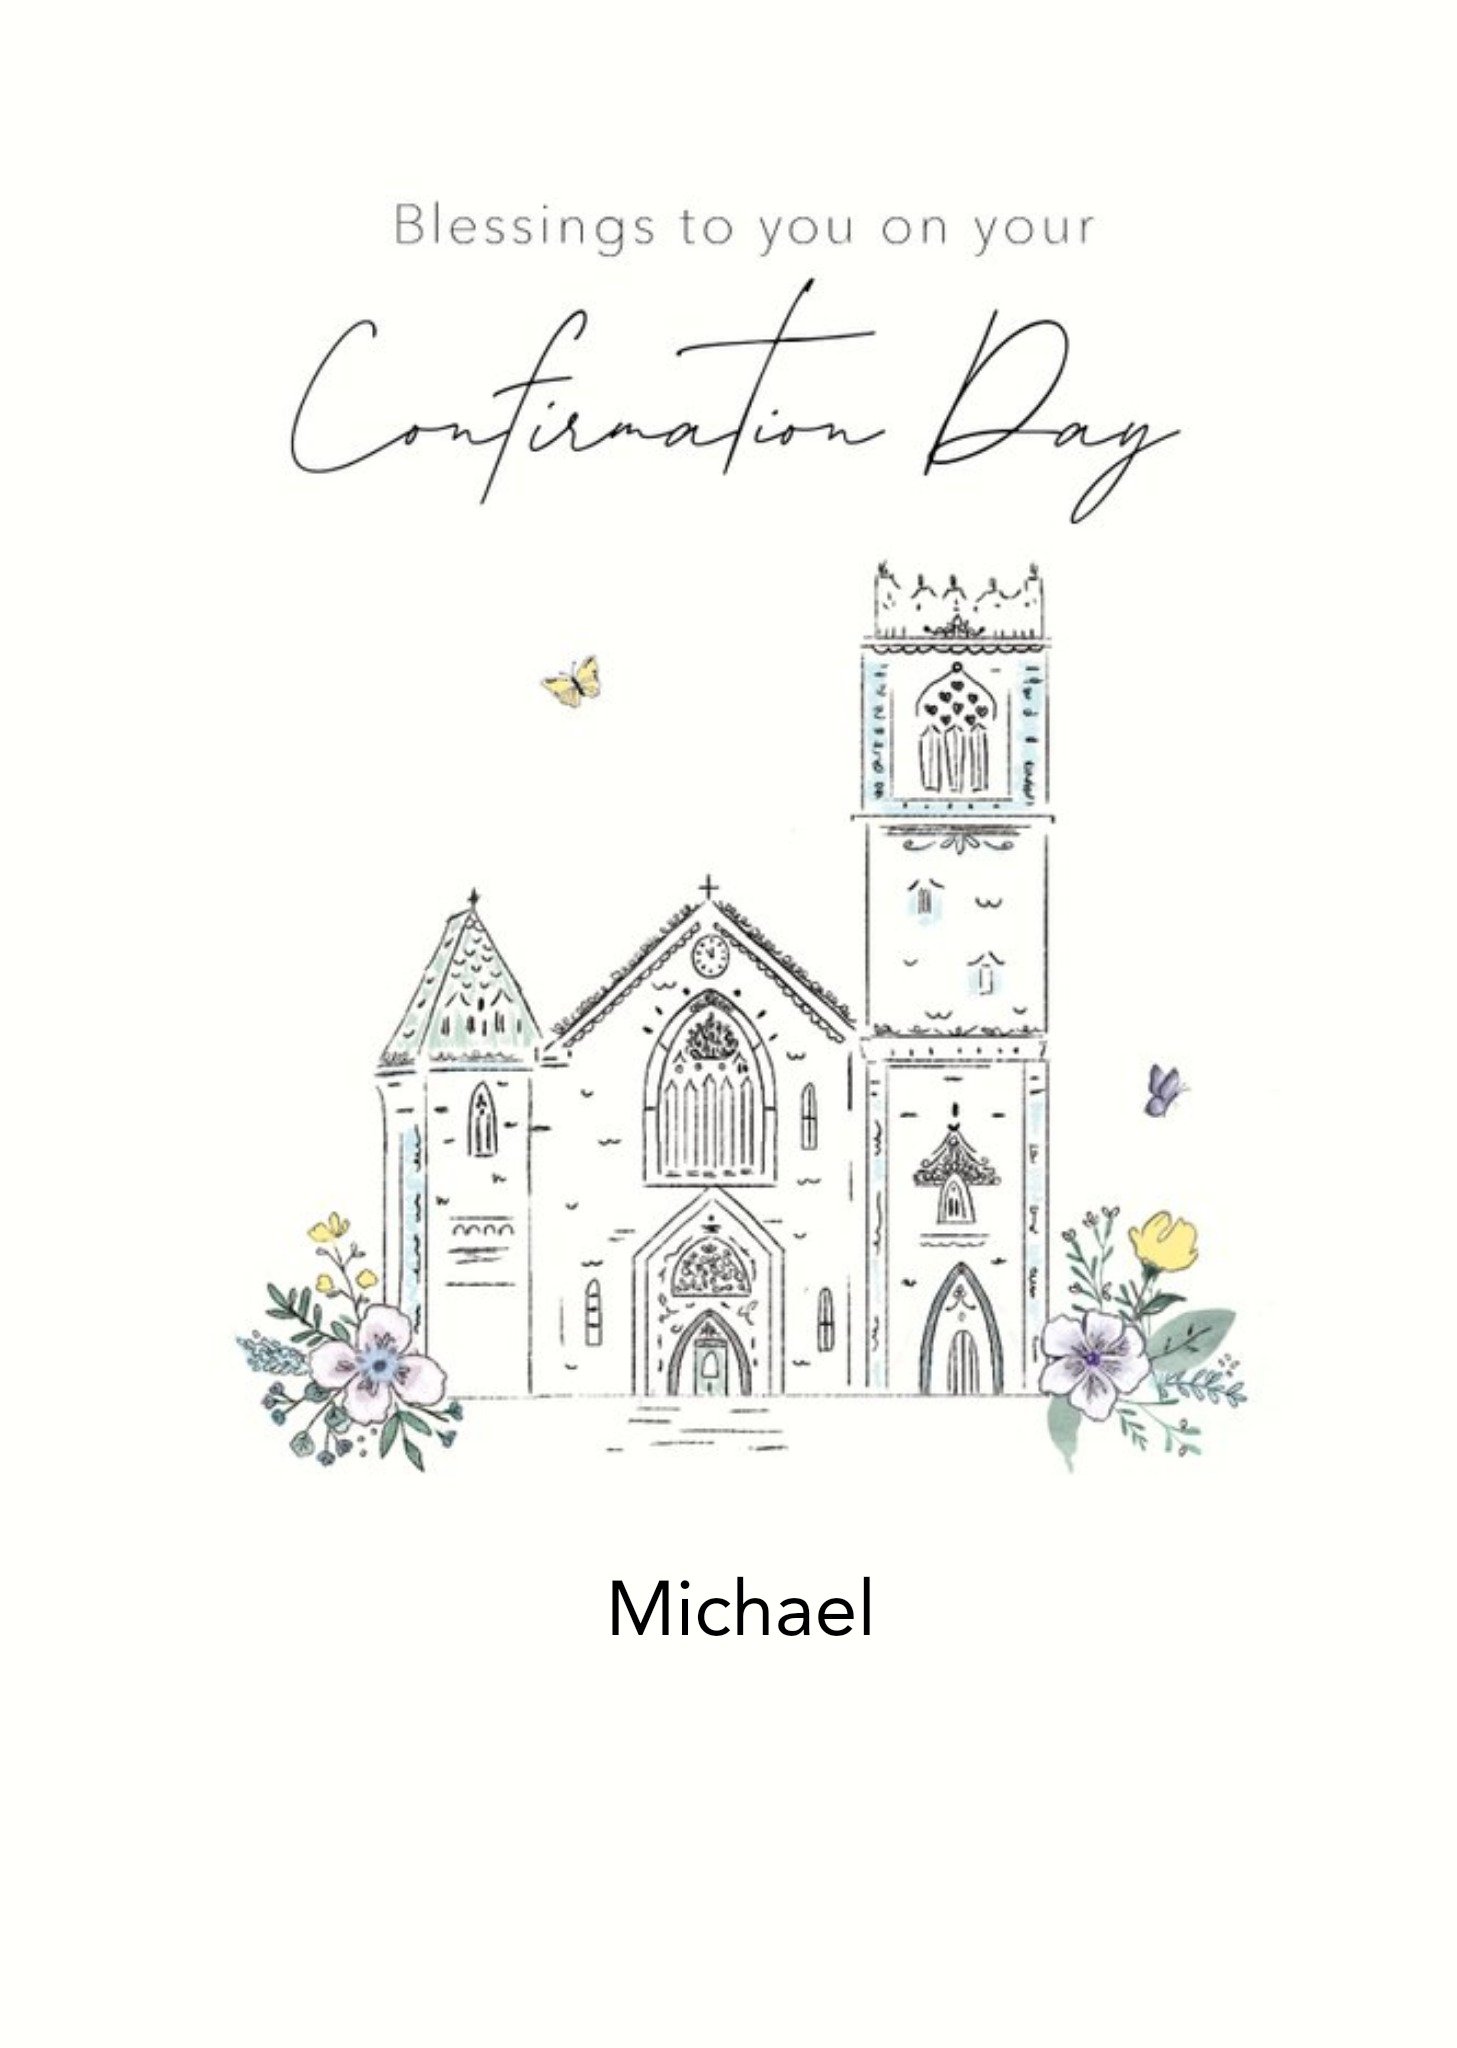 Moonpig Illustration Of A Church Surrounded By Flowers On A White Background Confirmation Card Ecard